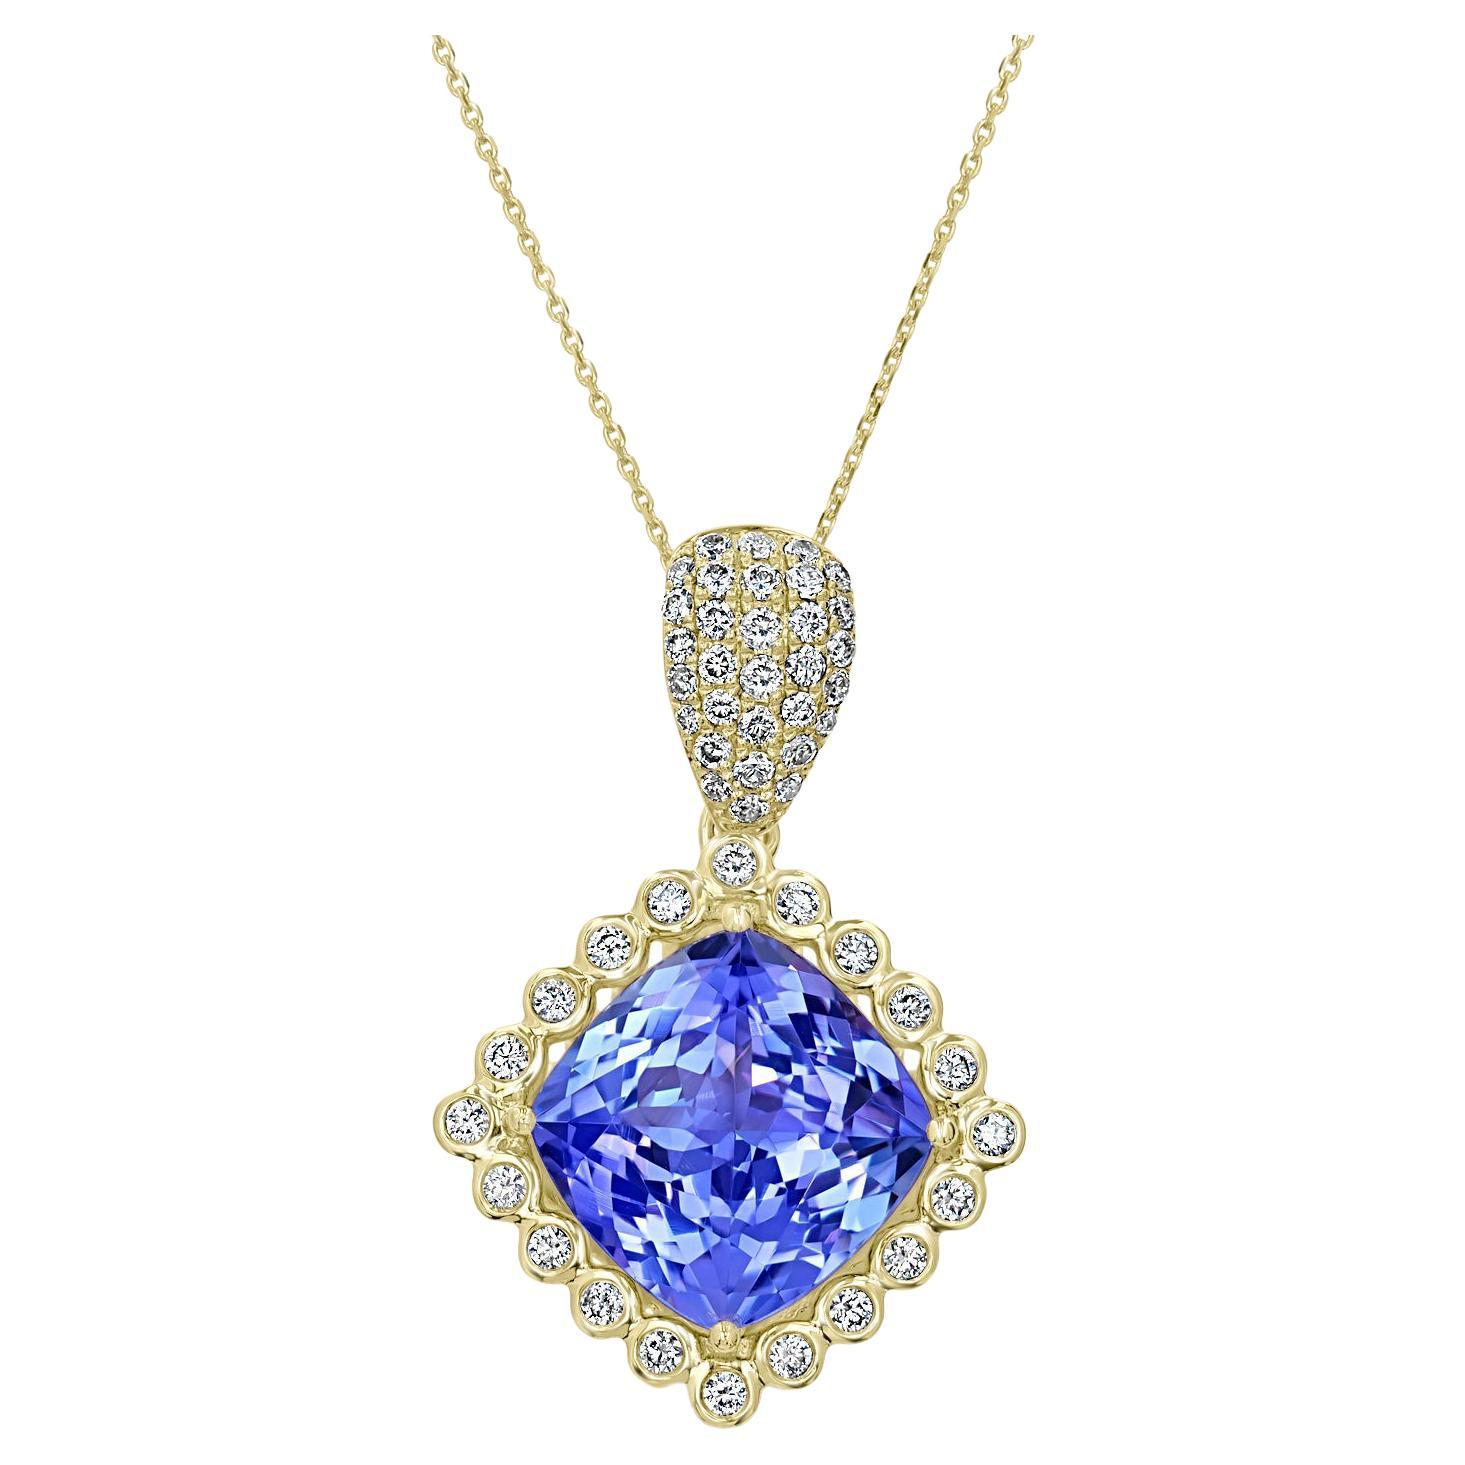 10.61ct Tanzanite Pendant with 0.83tct Diamonds Set in 18K Yellow Gold For Sale